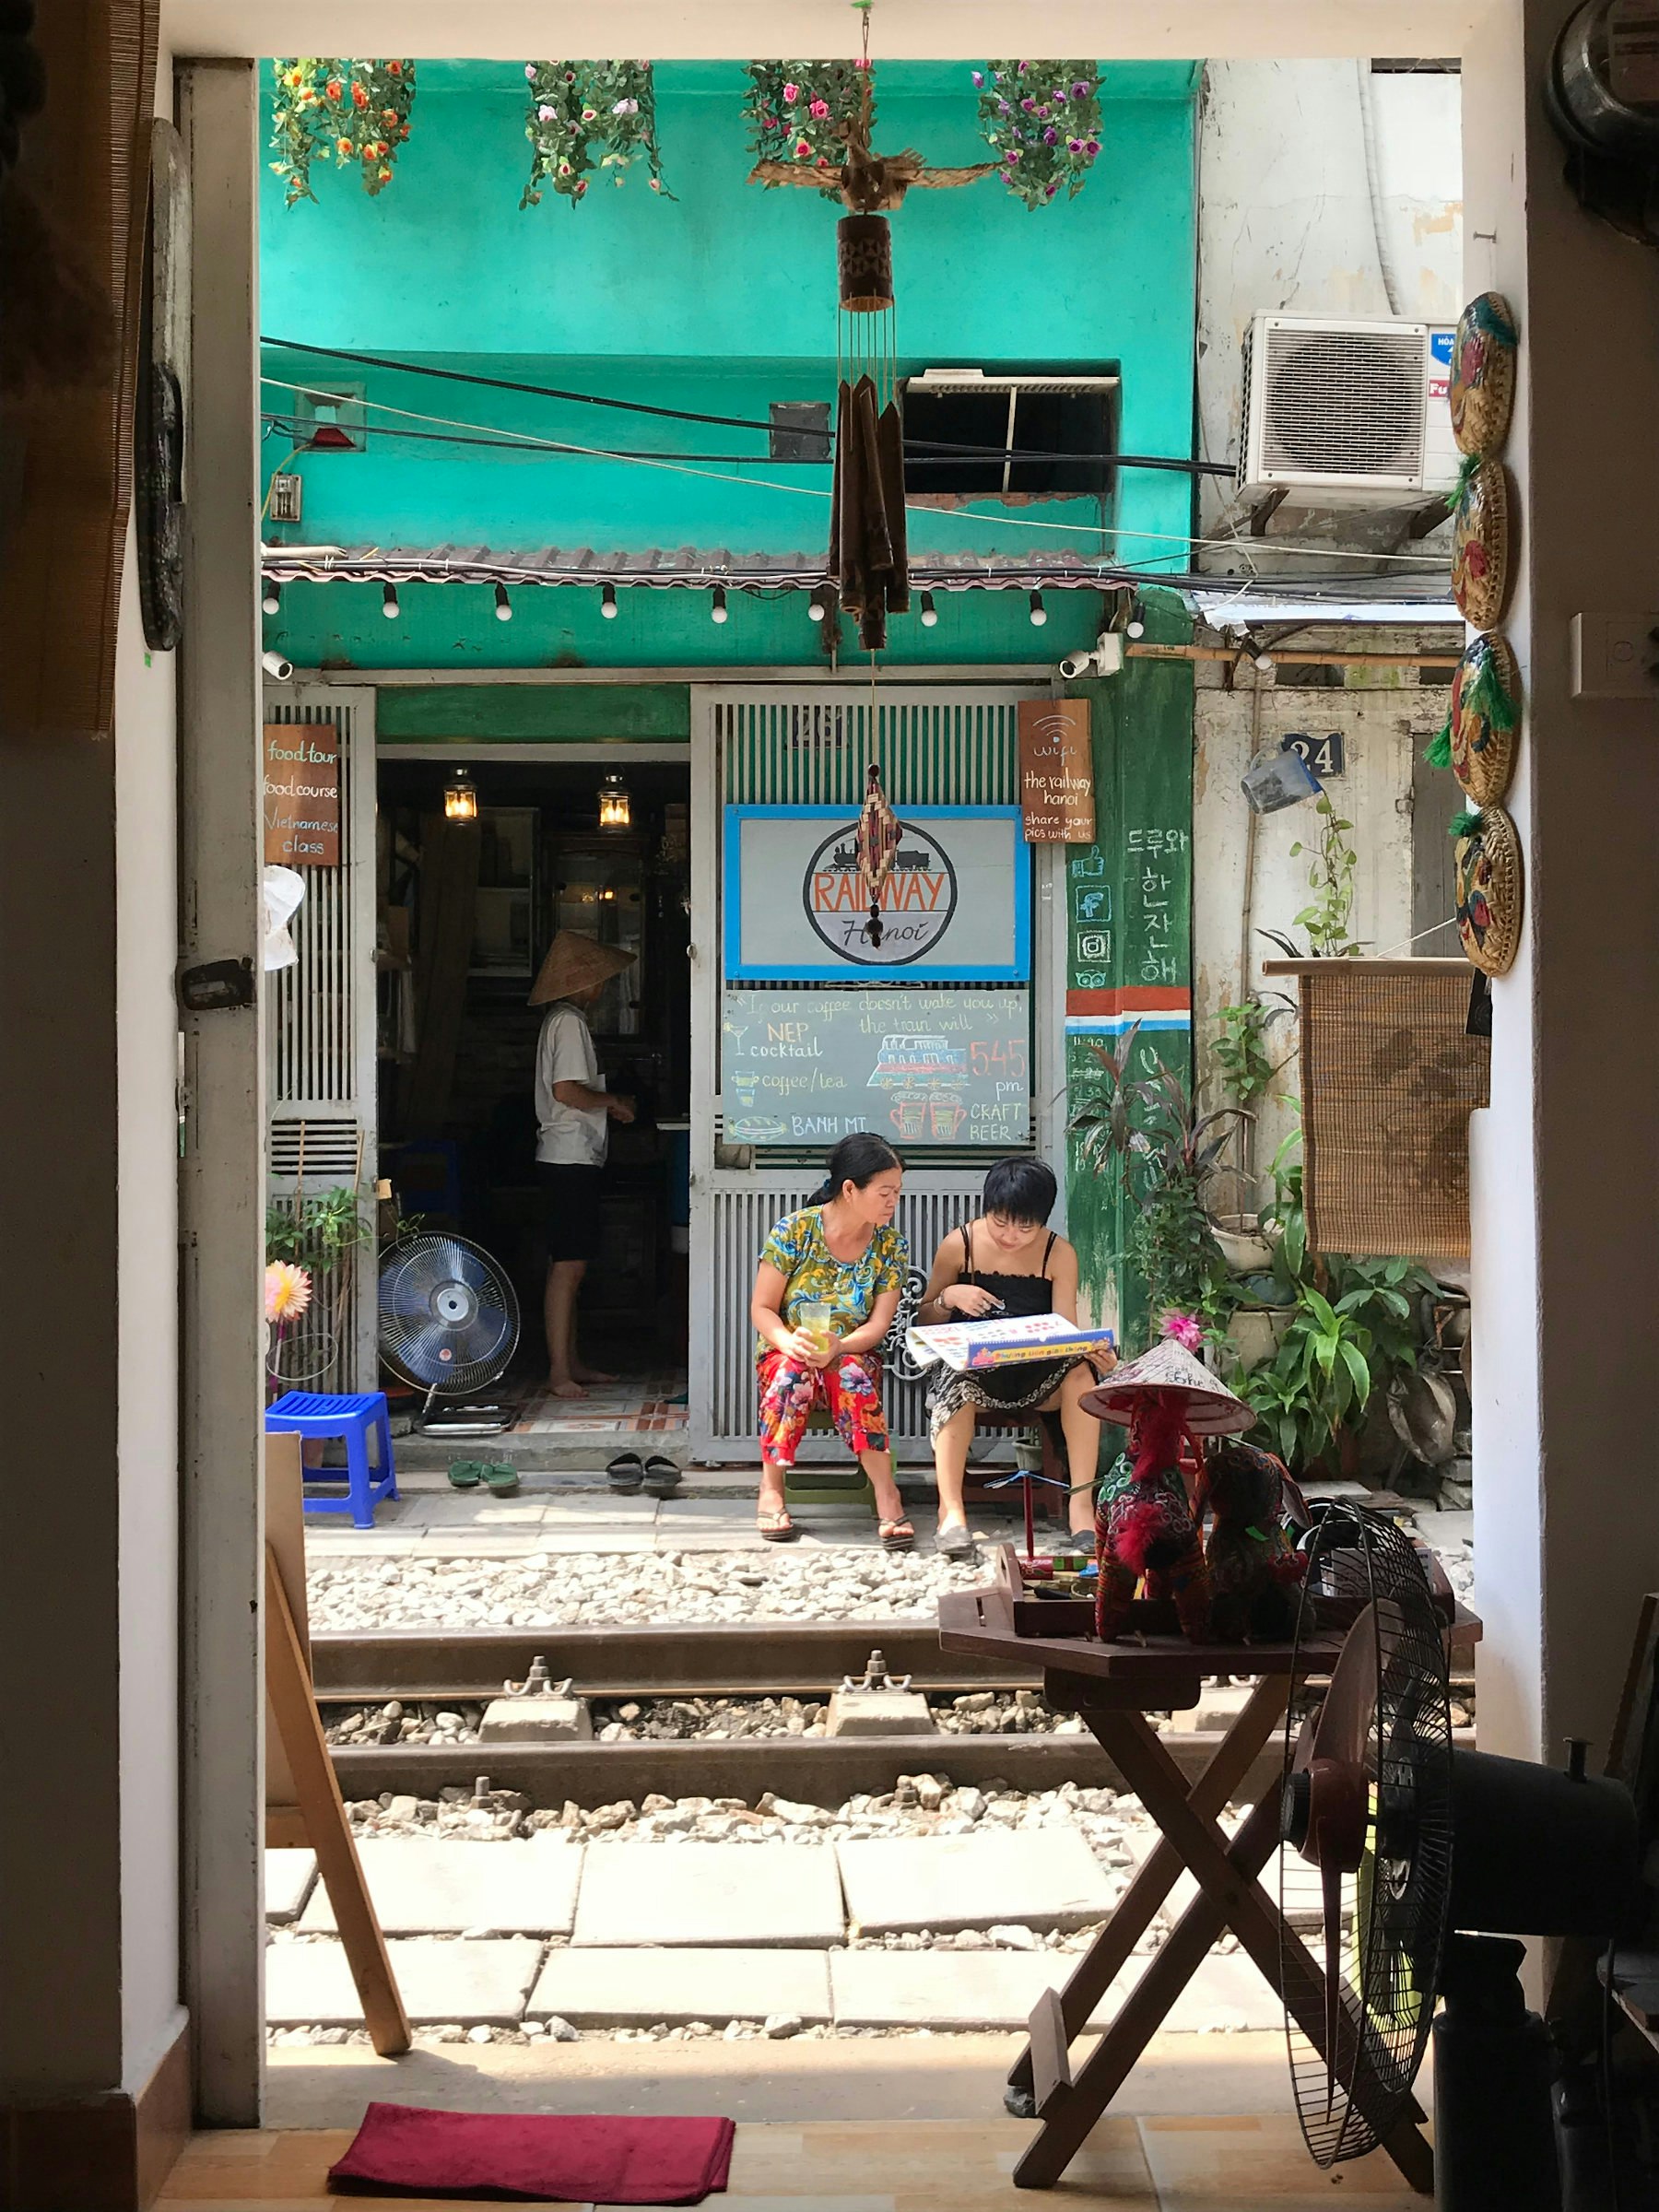 Two women sit outside the cafe in the sun